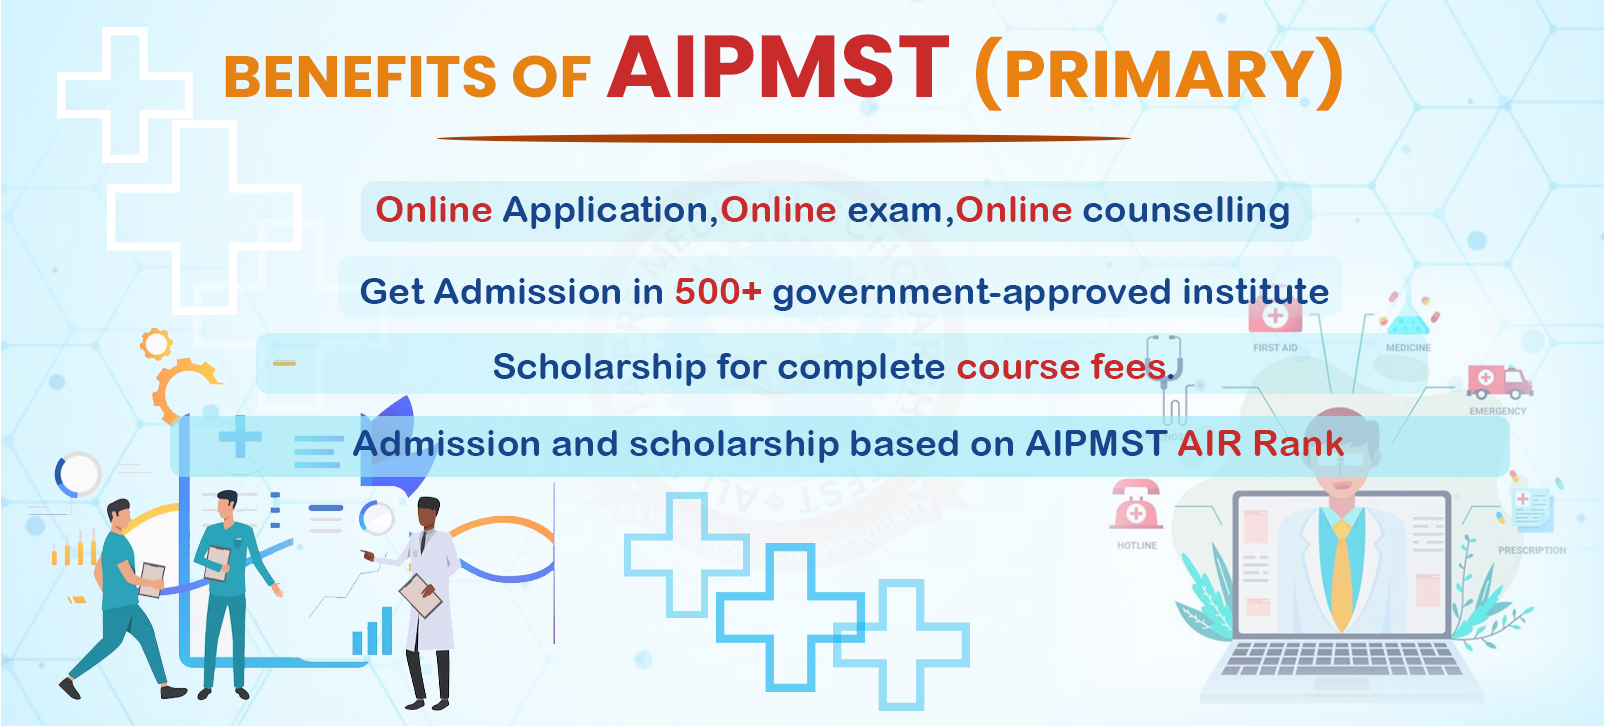 AIPMST (PRIMARY)